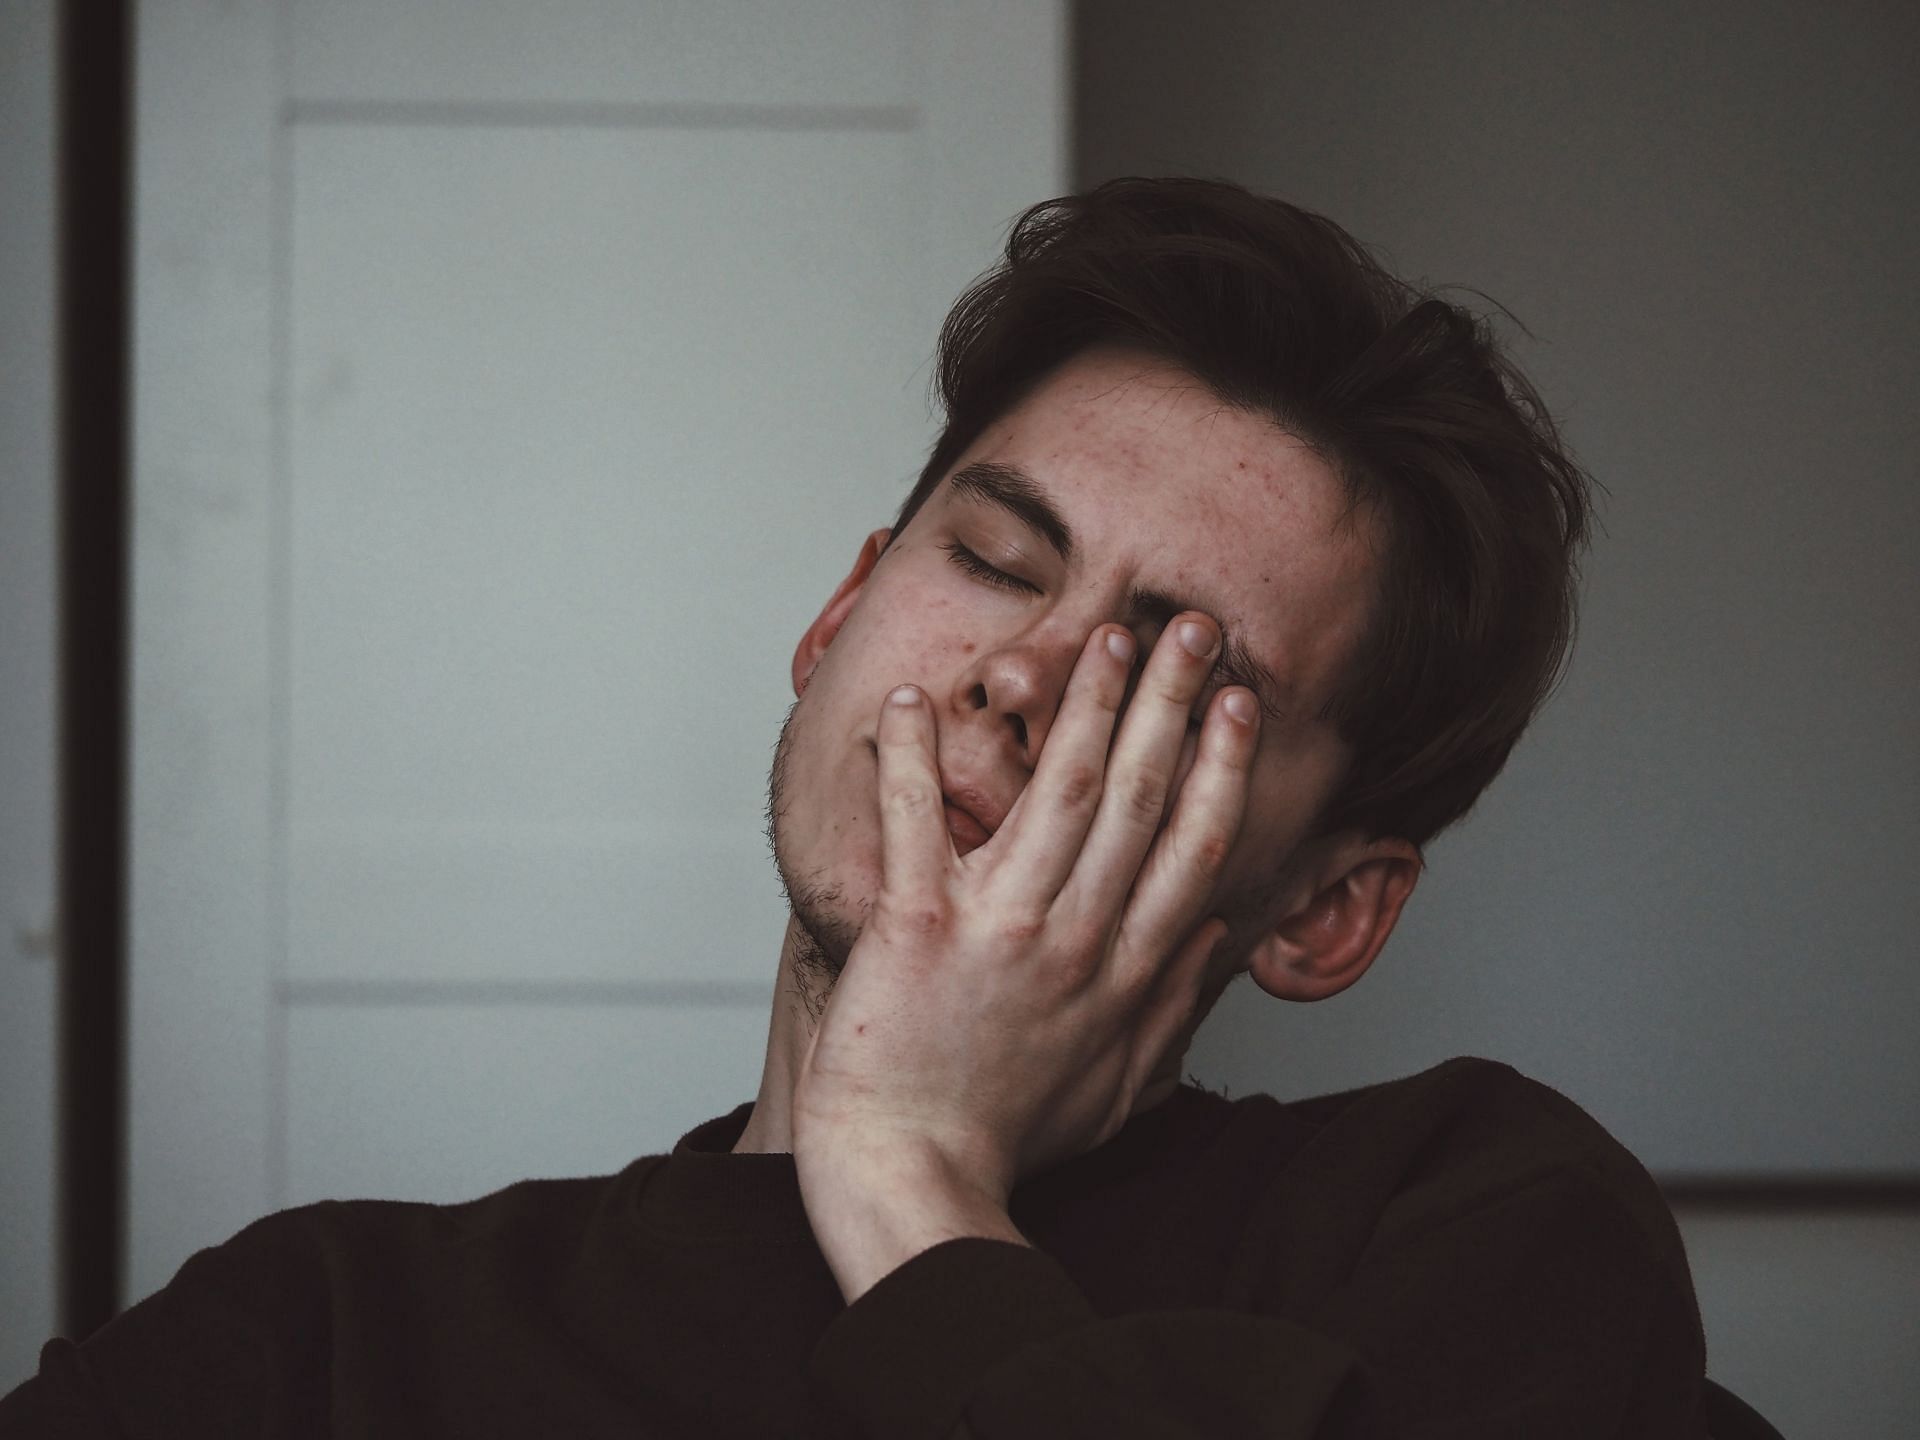 Tension headaches can occur occasionally, frequently, or intermittently, and the discomfort can linger for a week or up to 30 minutes. (Image via Unsplash/ Adrian Swancar)